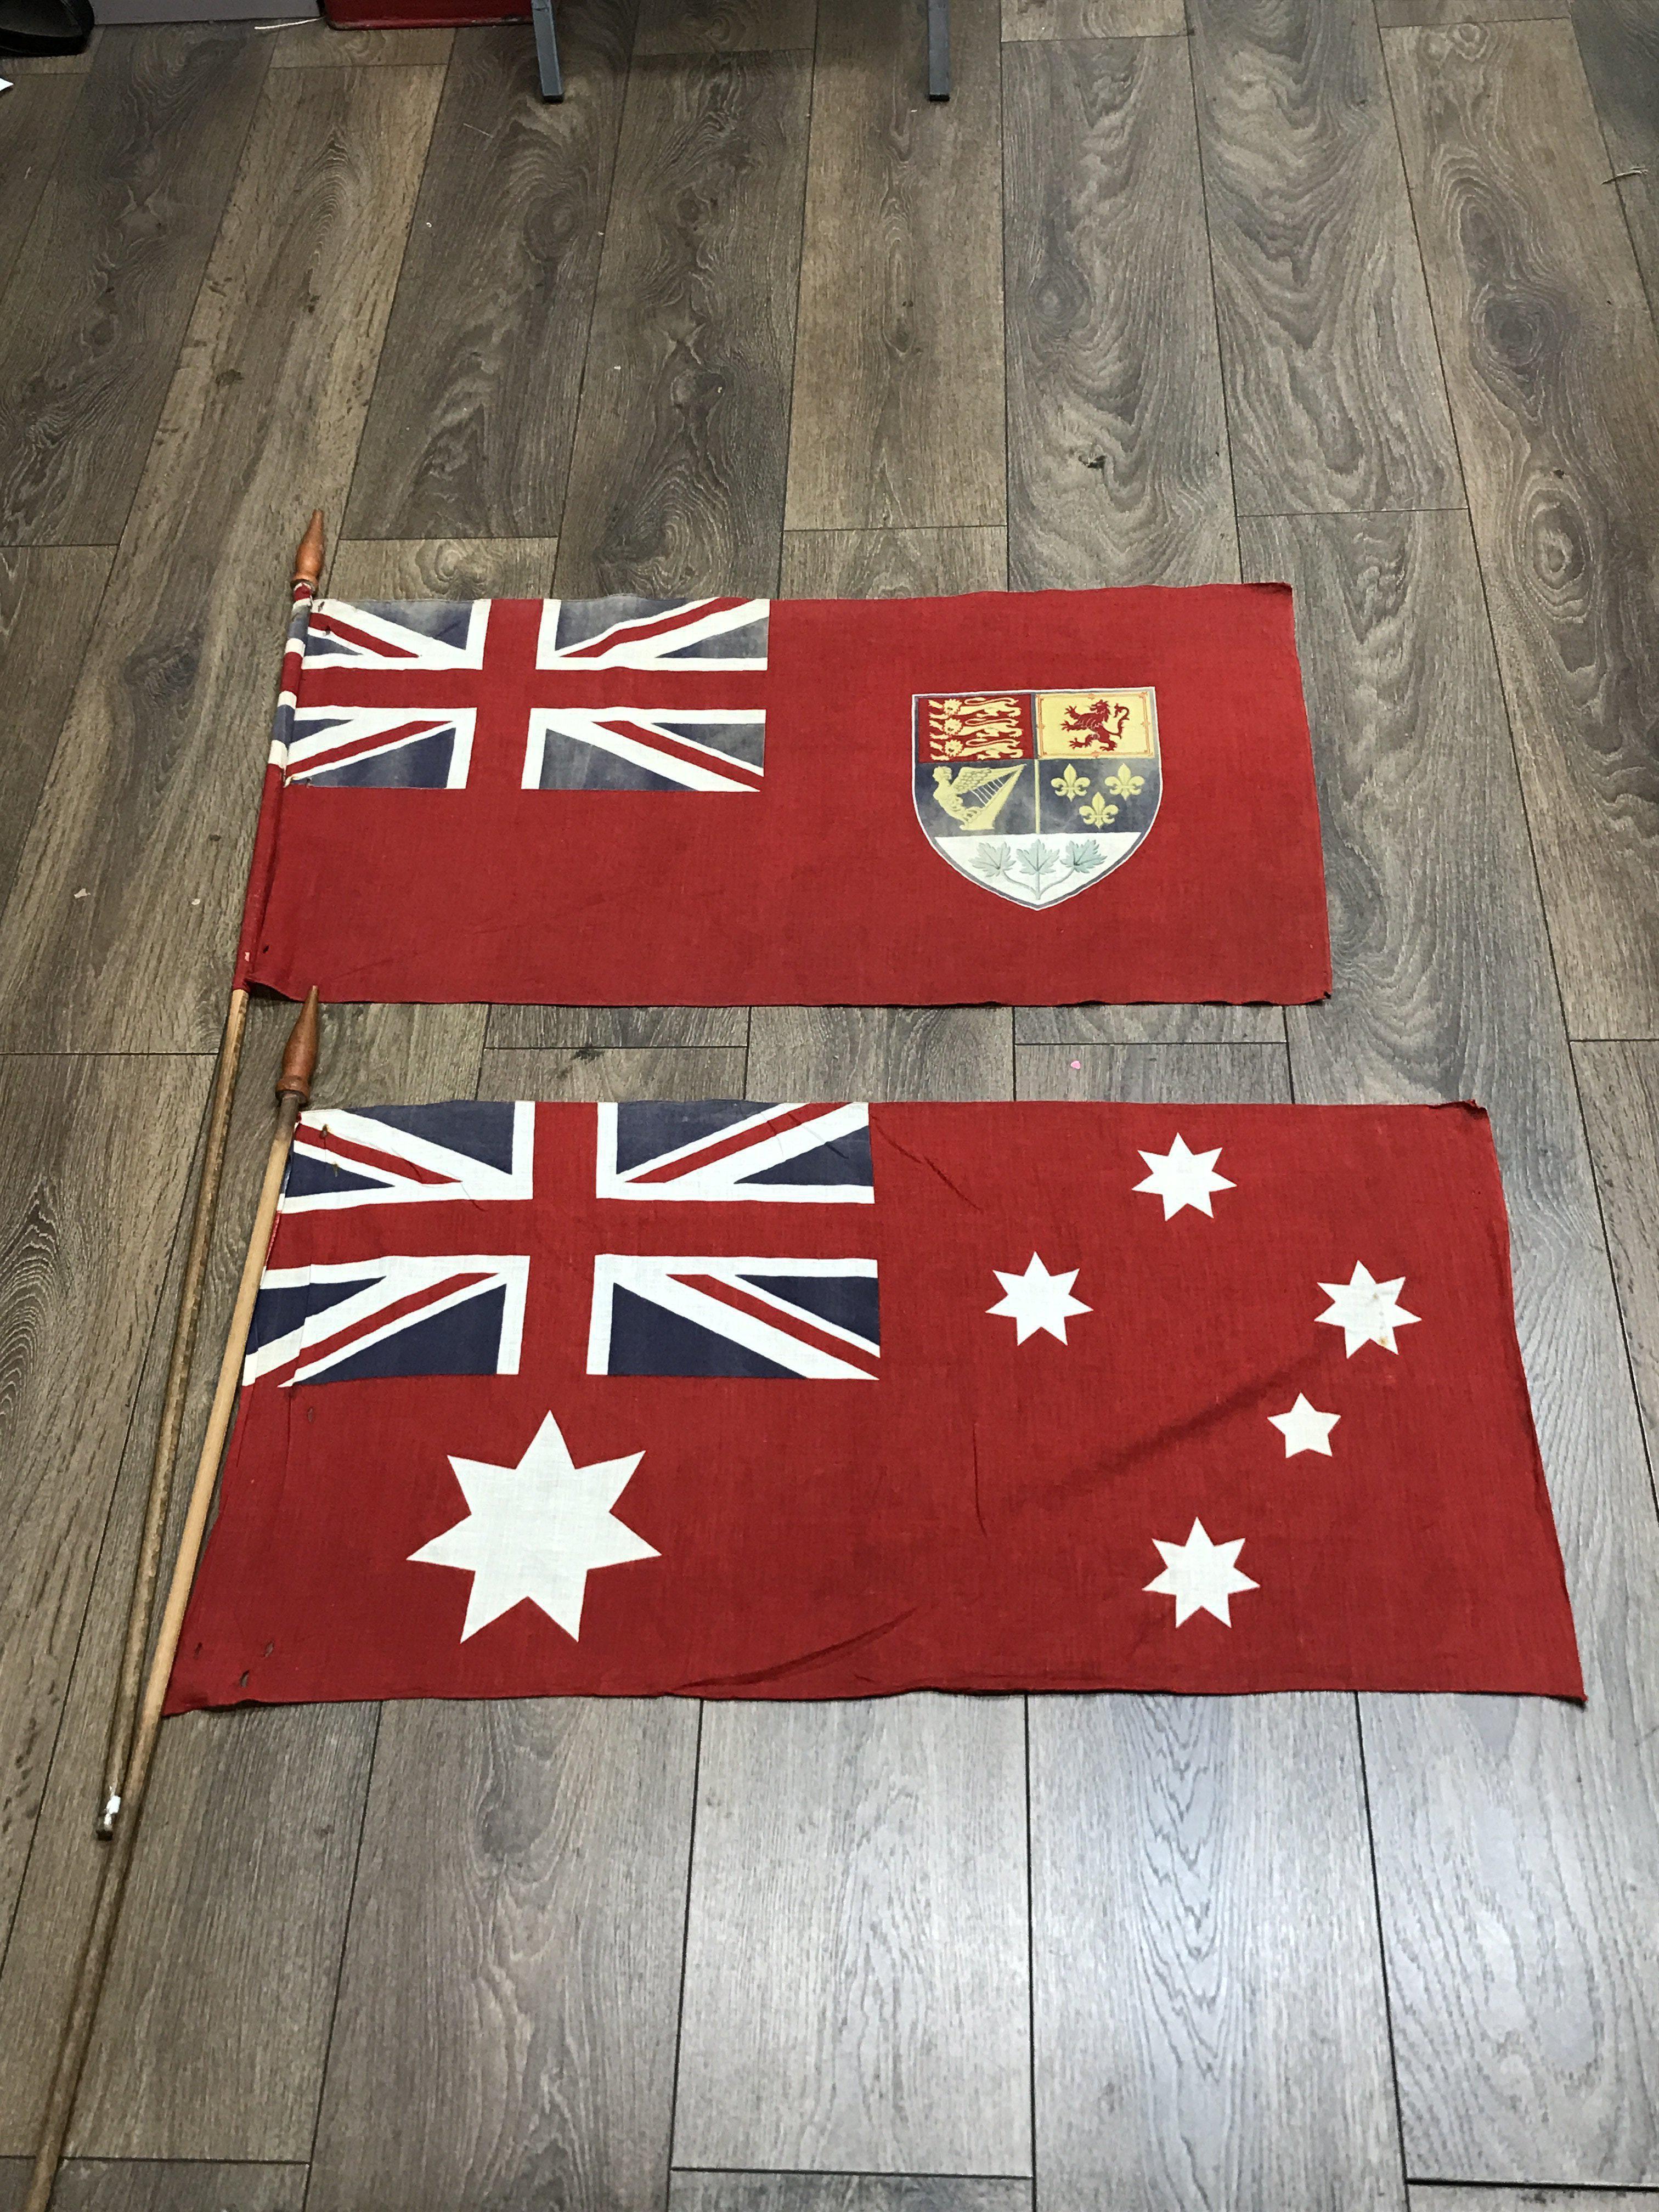 Two naval tiller flags. One is the Australian red